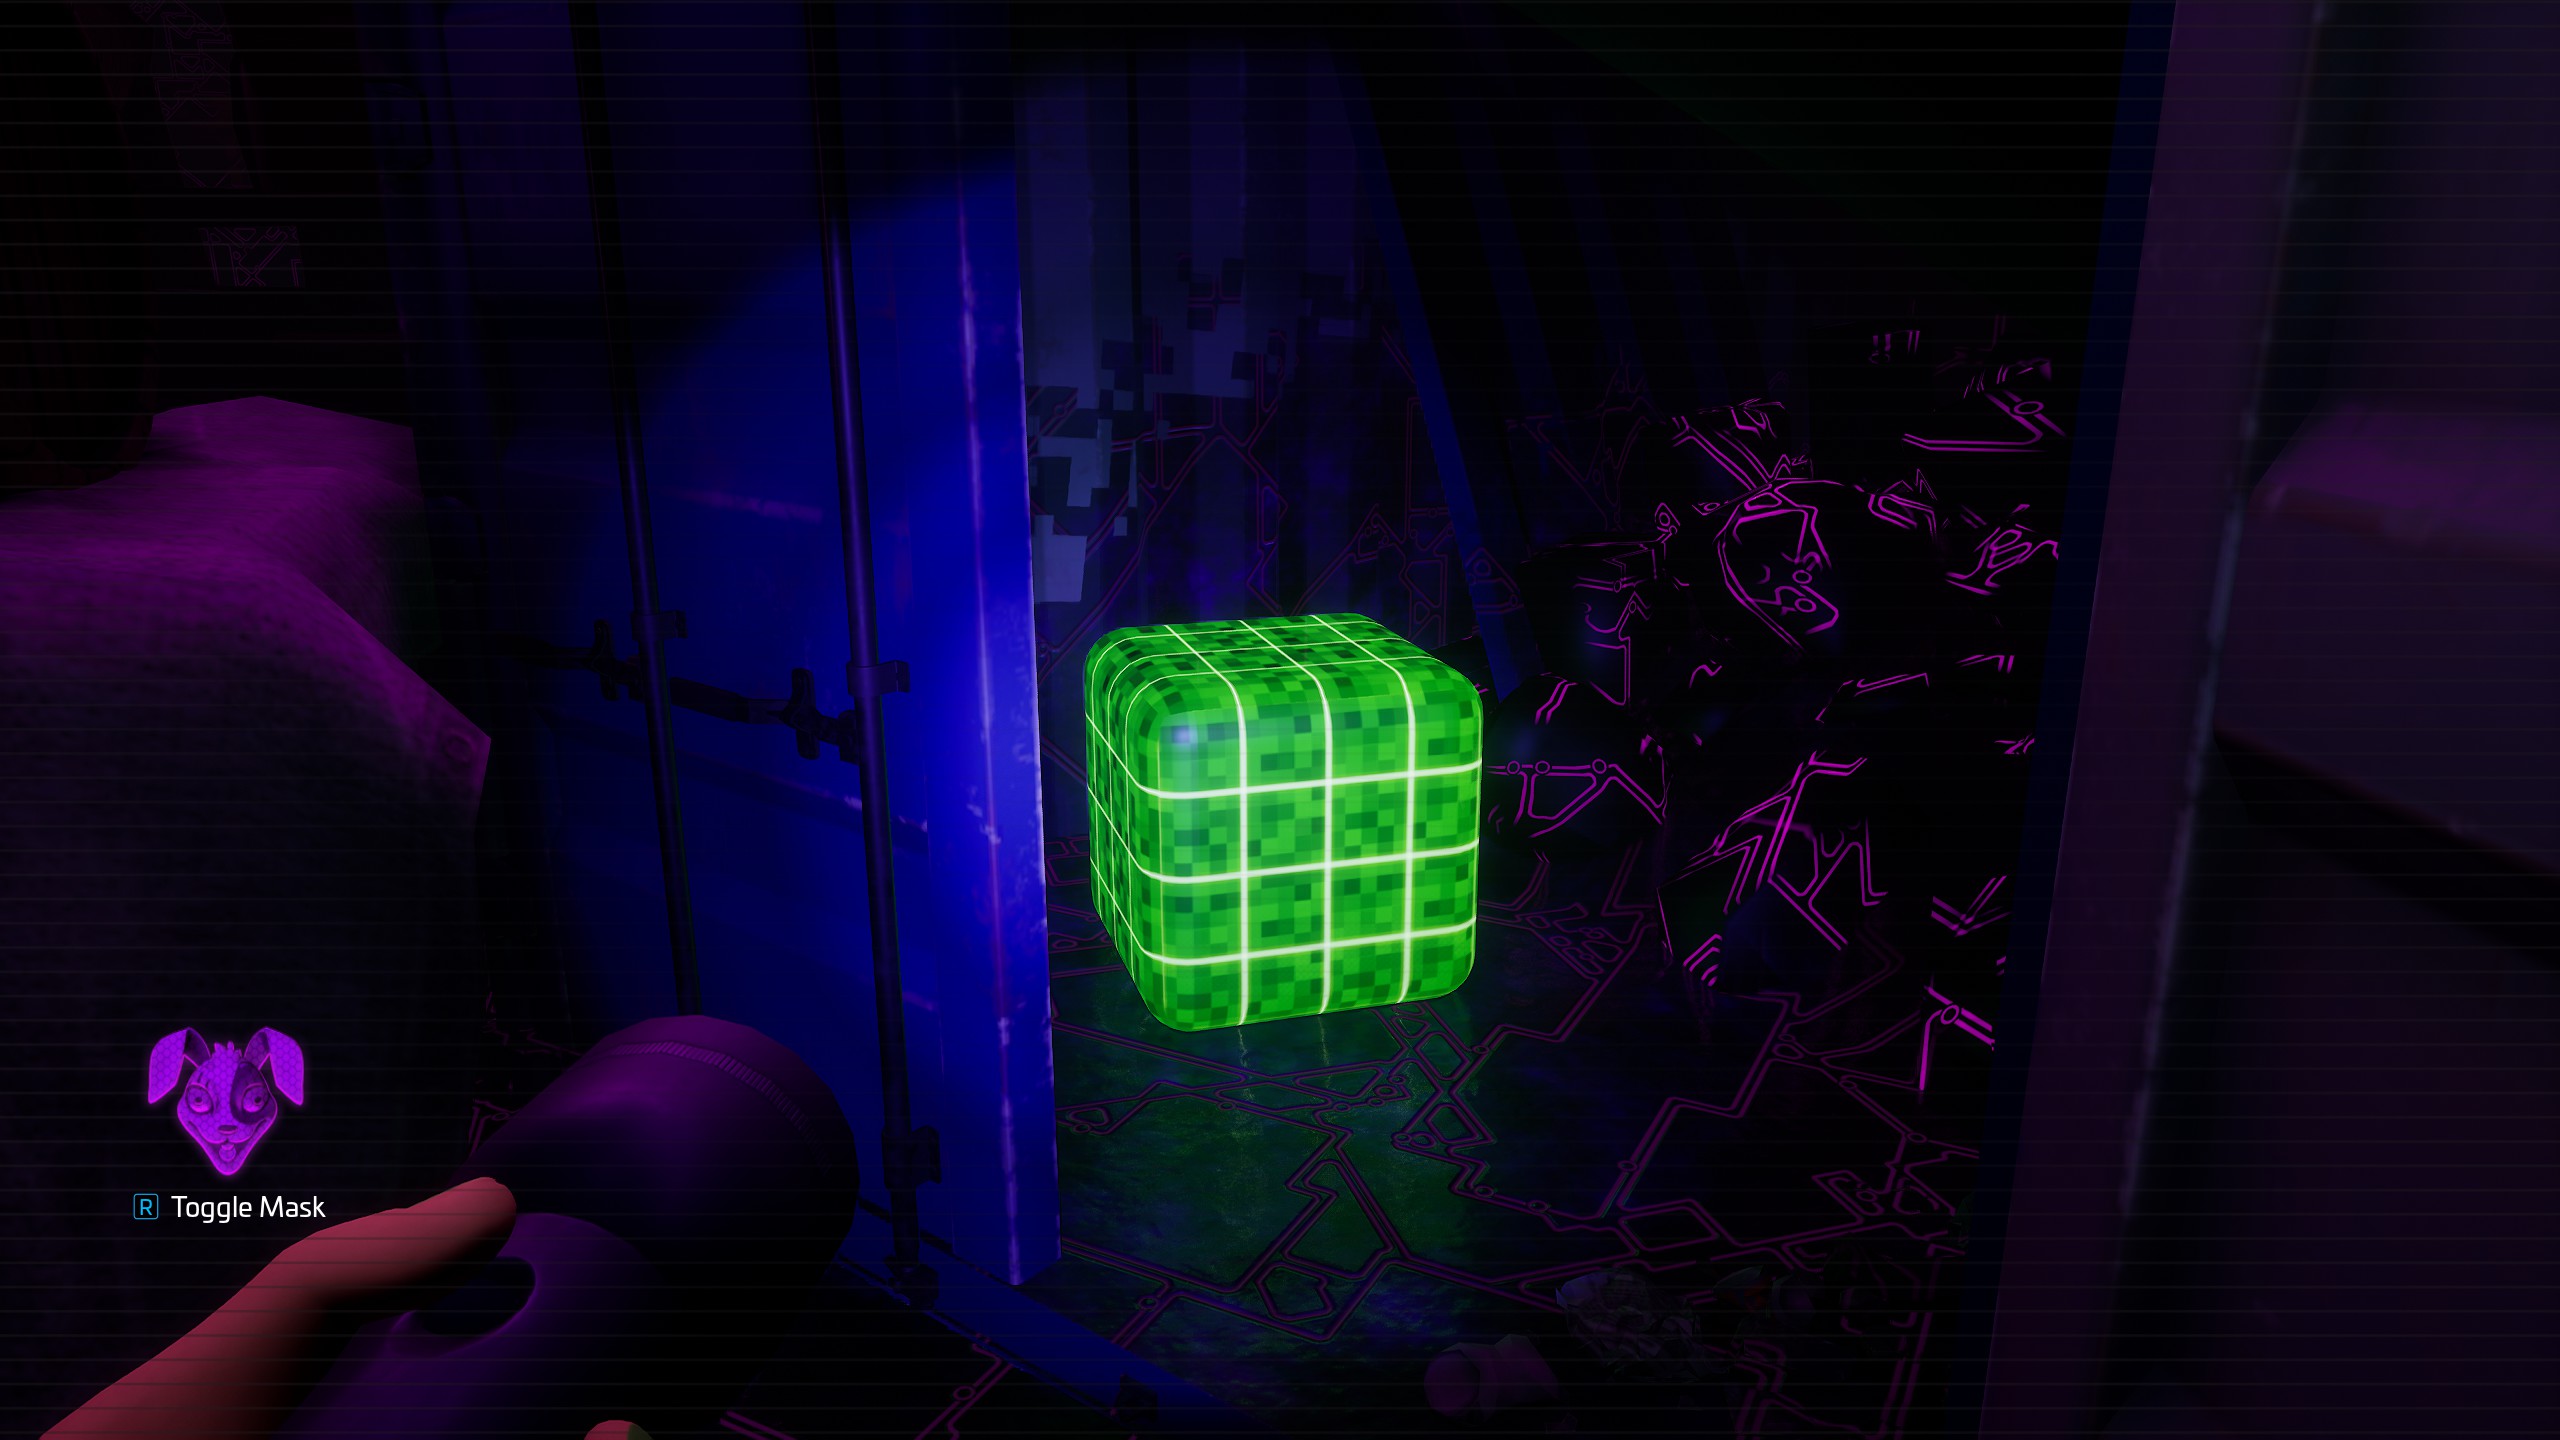 Five Nights at Freddy's: Security Breach RUIN Minecraft Map